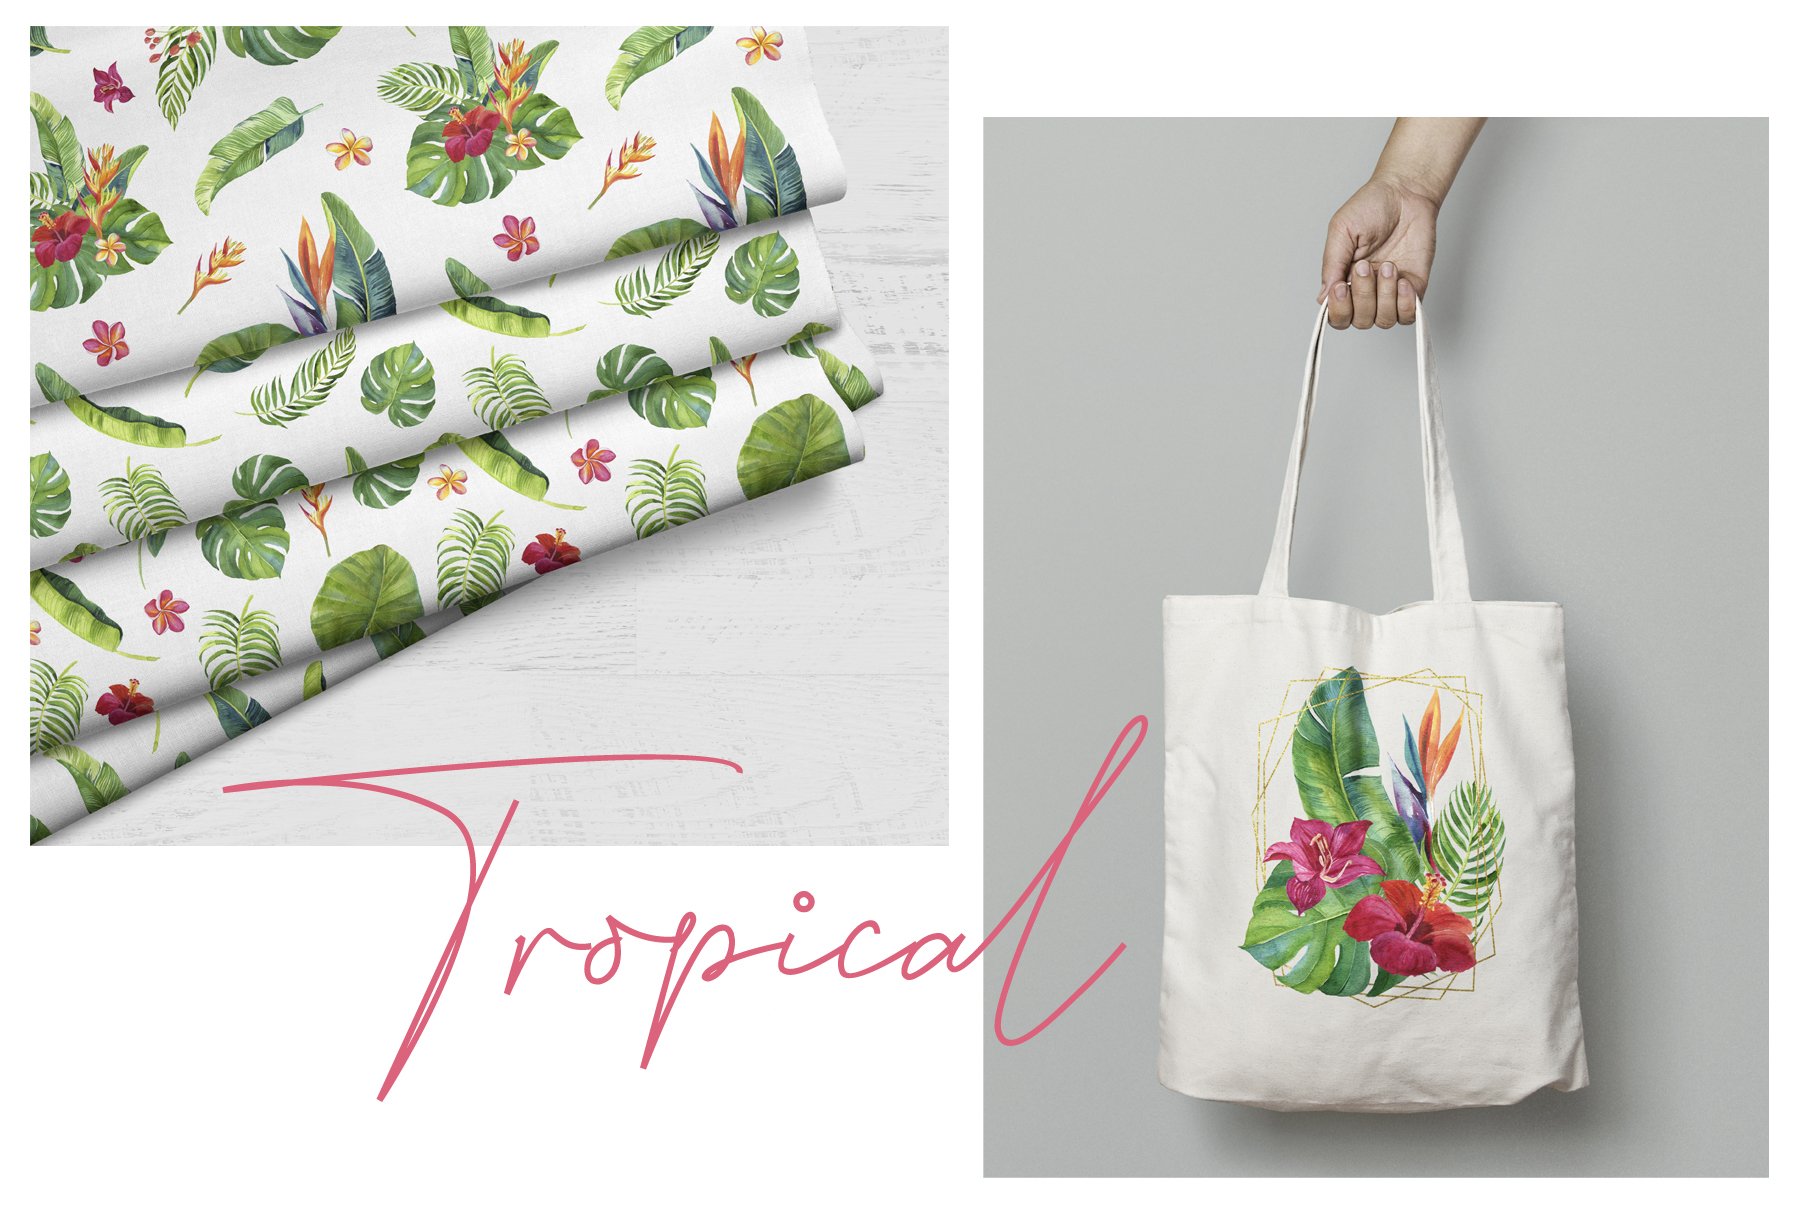 Tote bag with tropical flowers and leaves on it.